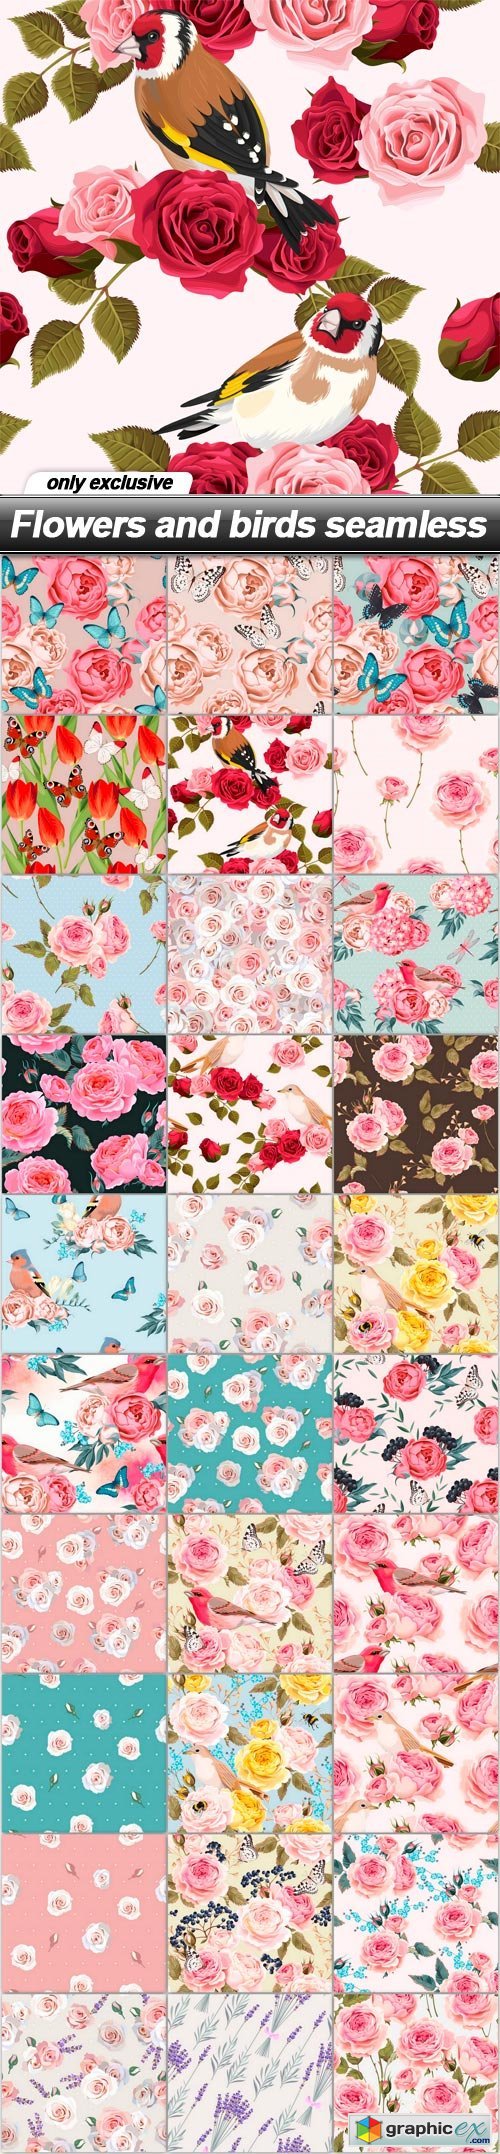 Flowers and birds seamless - 30 EPS